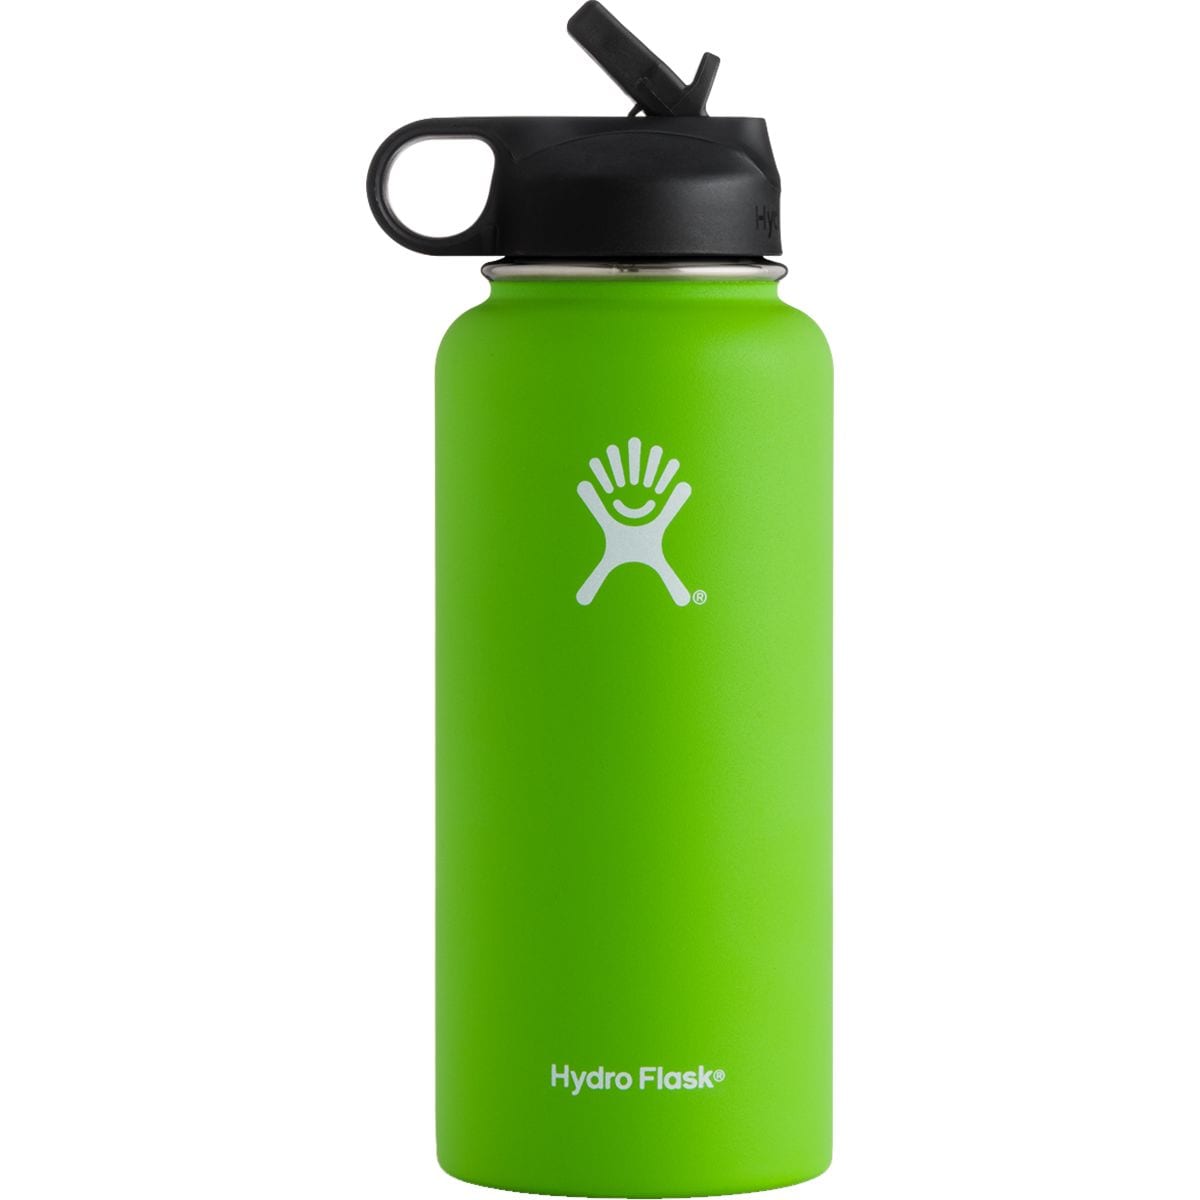 Hydro Flask 32oz Wide Mouth Water Bottle with Straw Lid